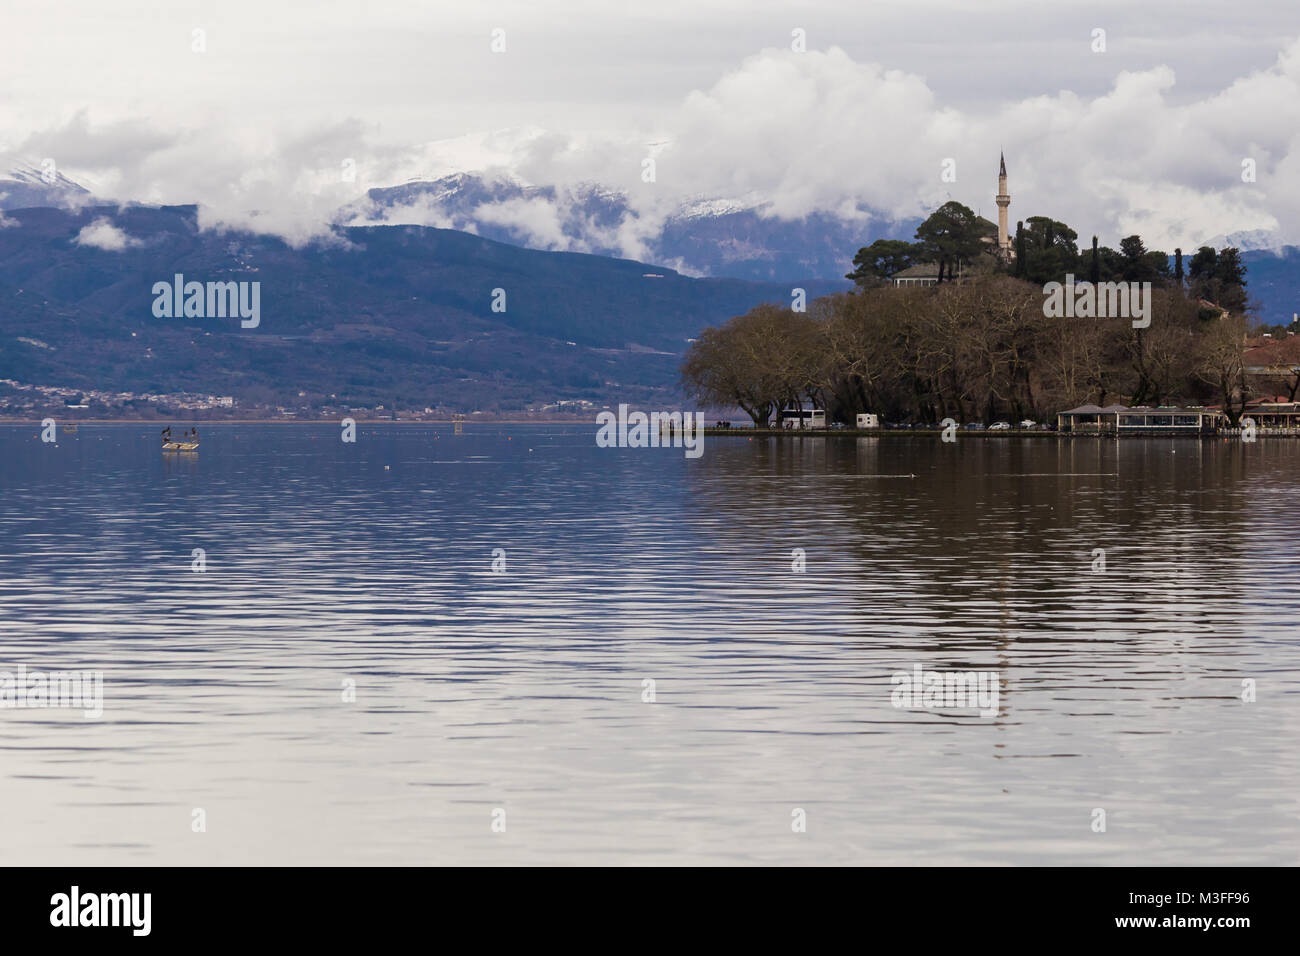 Ioannina lake called 'Pamvotis' in a winter cloudy foggy day Stock Photo